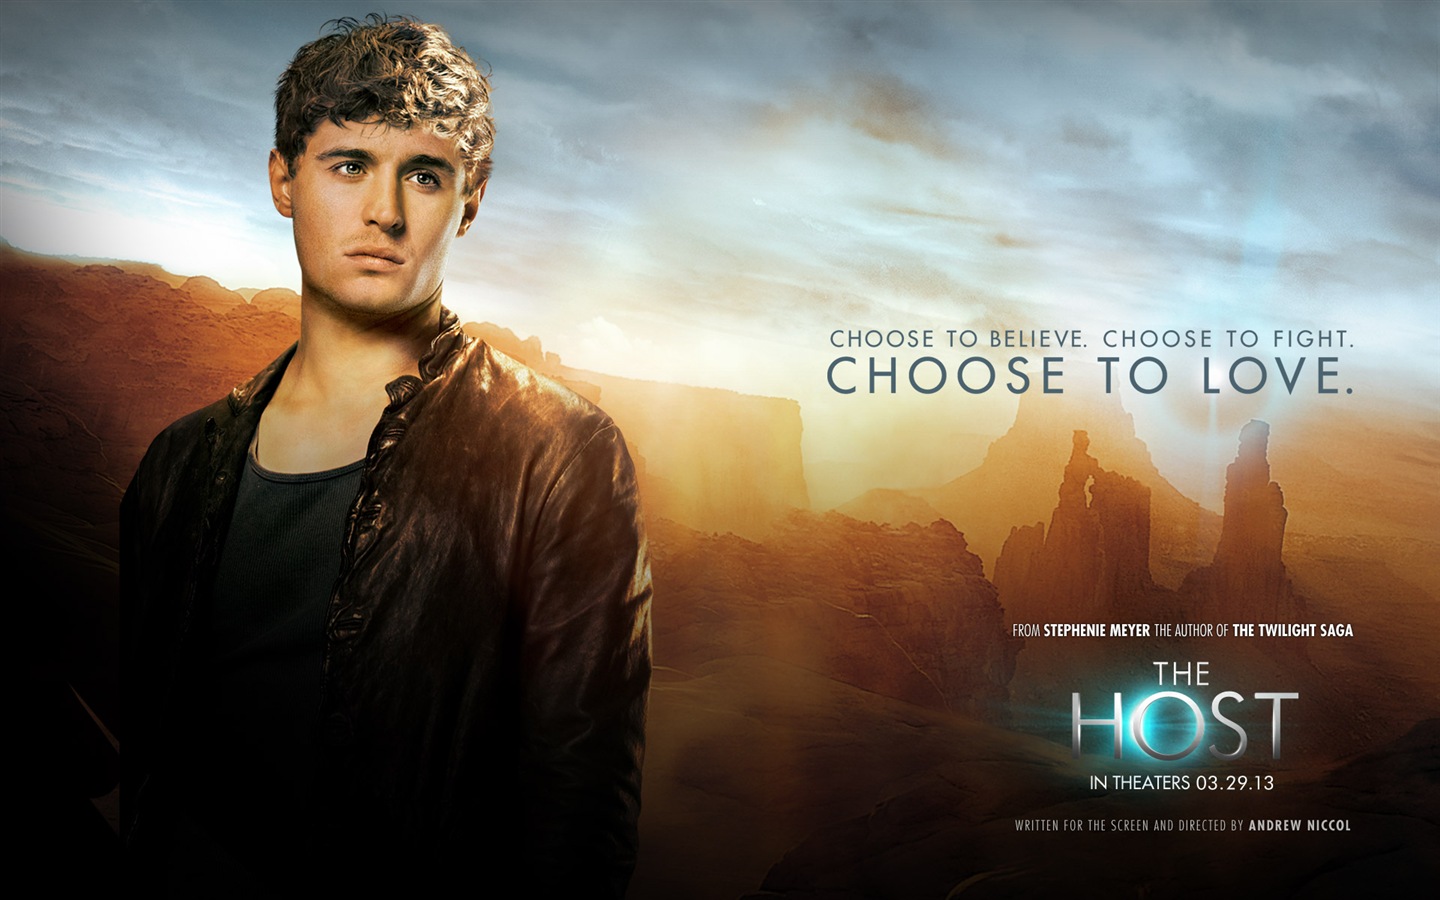 The Host 2013 movie HD wallpapers #17 - 1440x900